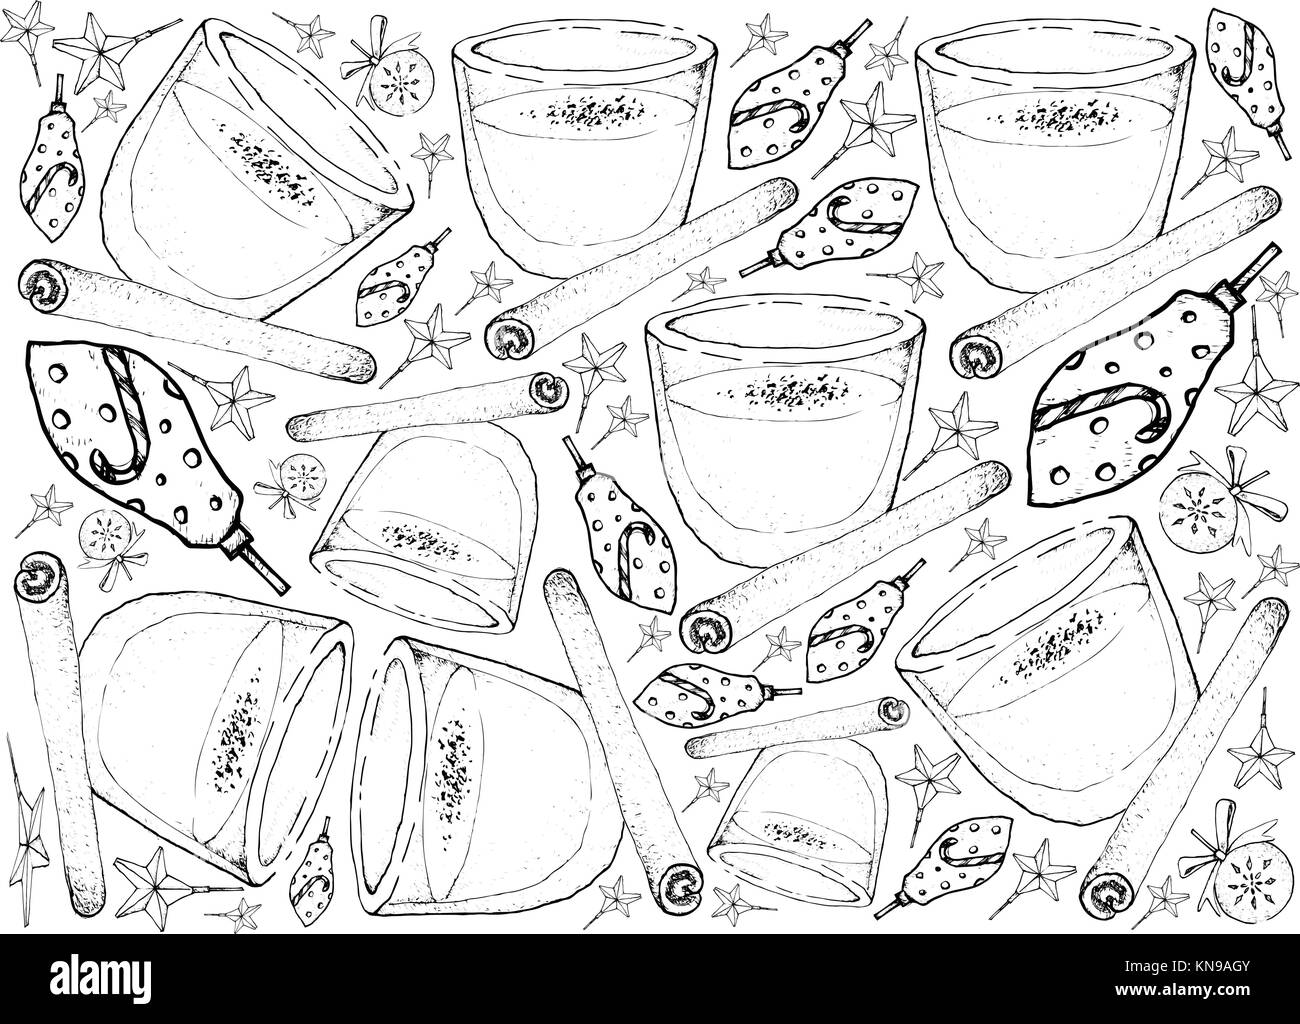 Background Illustration Hand Drawn Sketch of Eggnog or Egg Milk Punch Made with Milk, Cream, Sugar, Whipped Egg Whites, Egg Yolks, Cinamon and Grated  Stock Vector